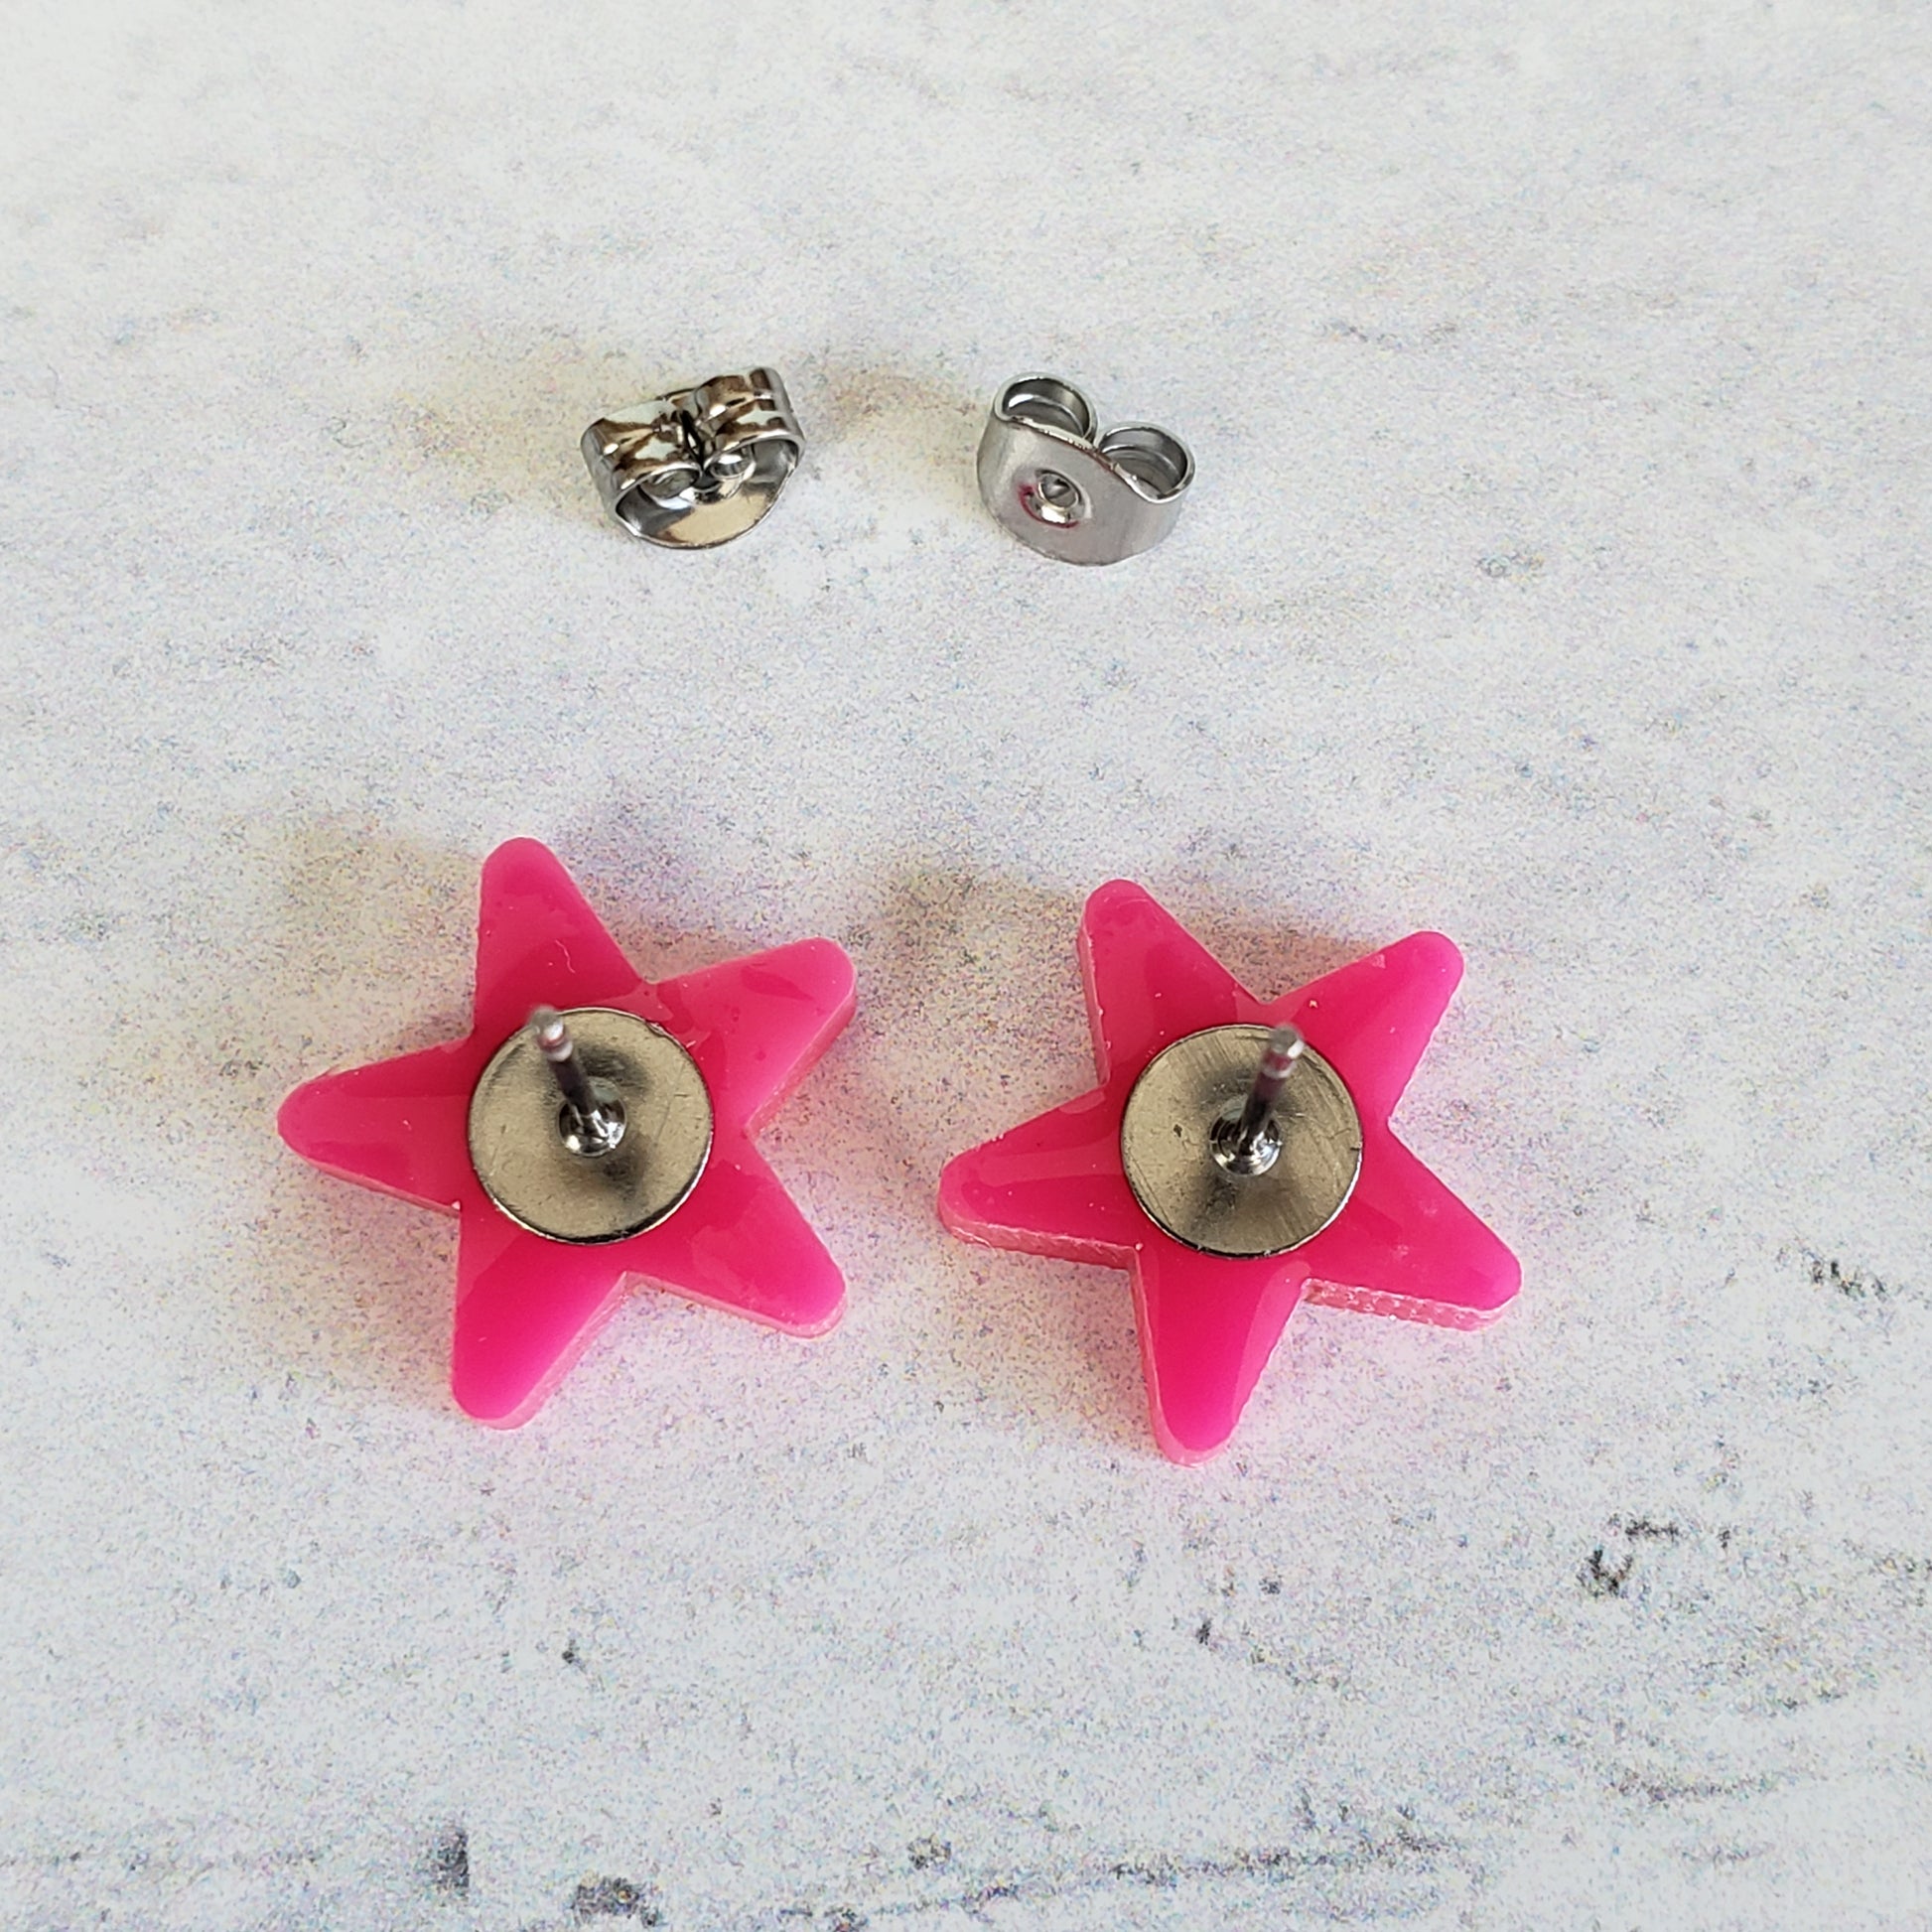 Backside of hot pink star stud earrings showing posts